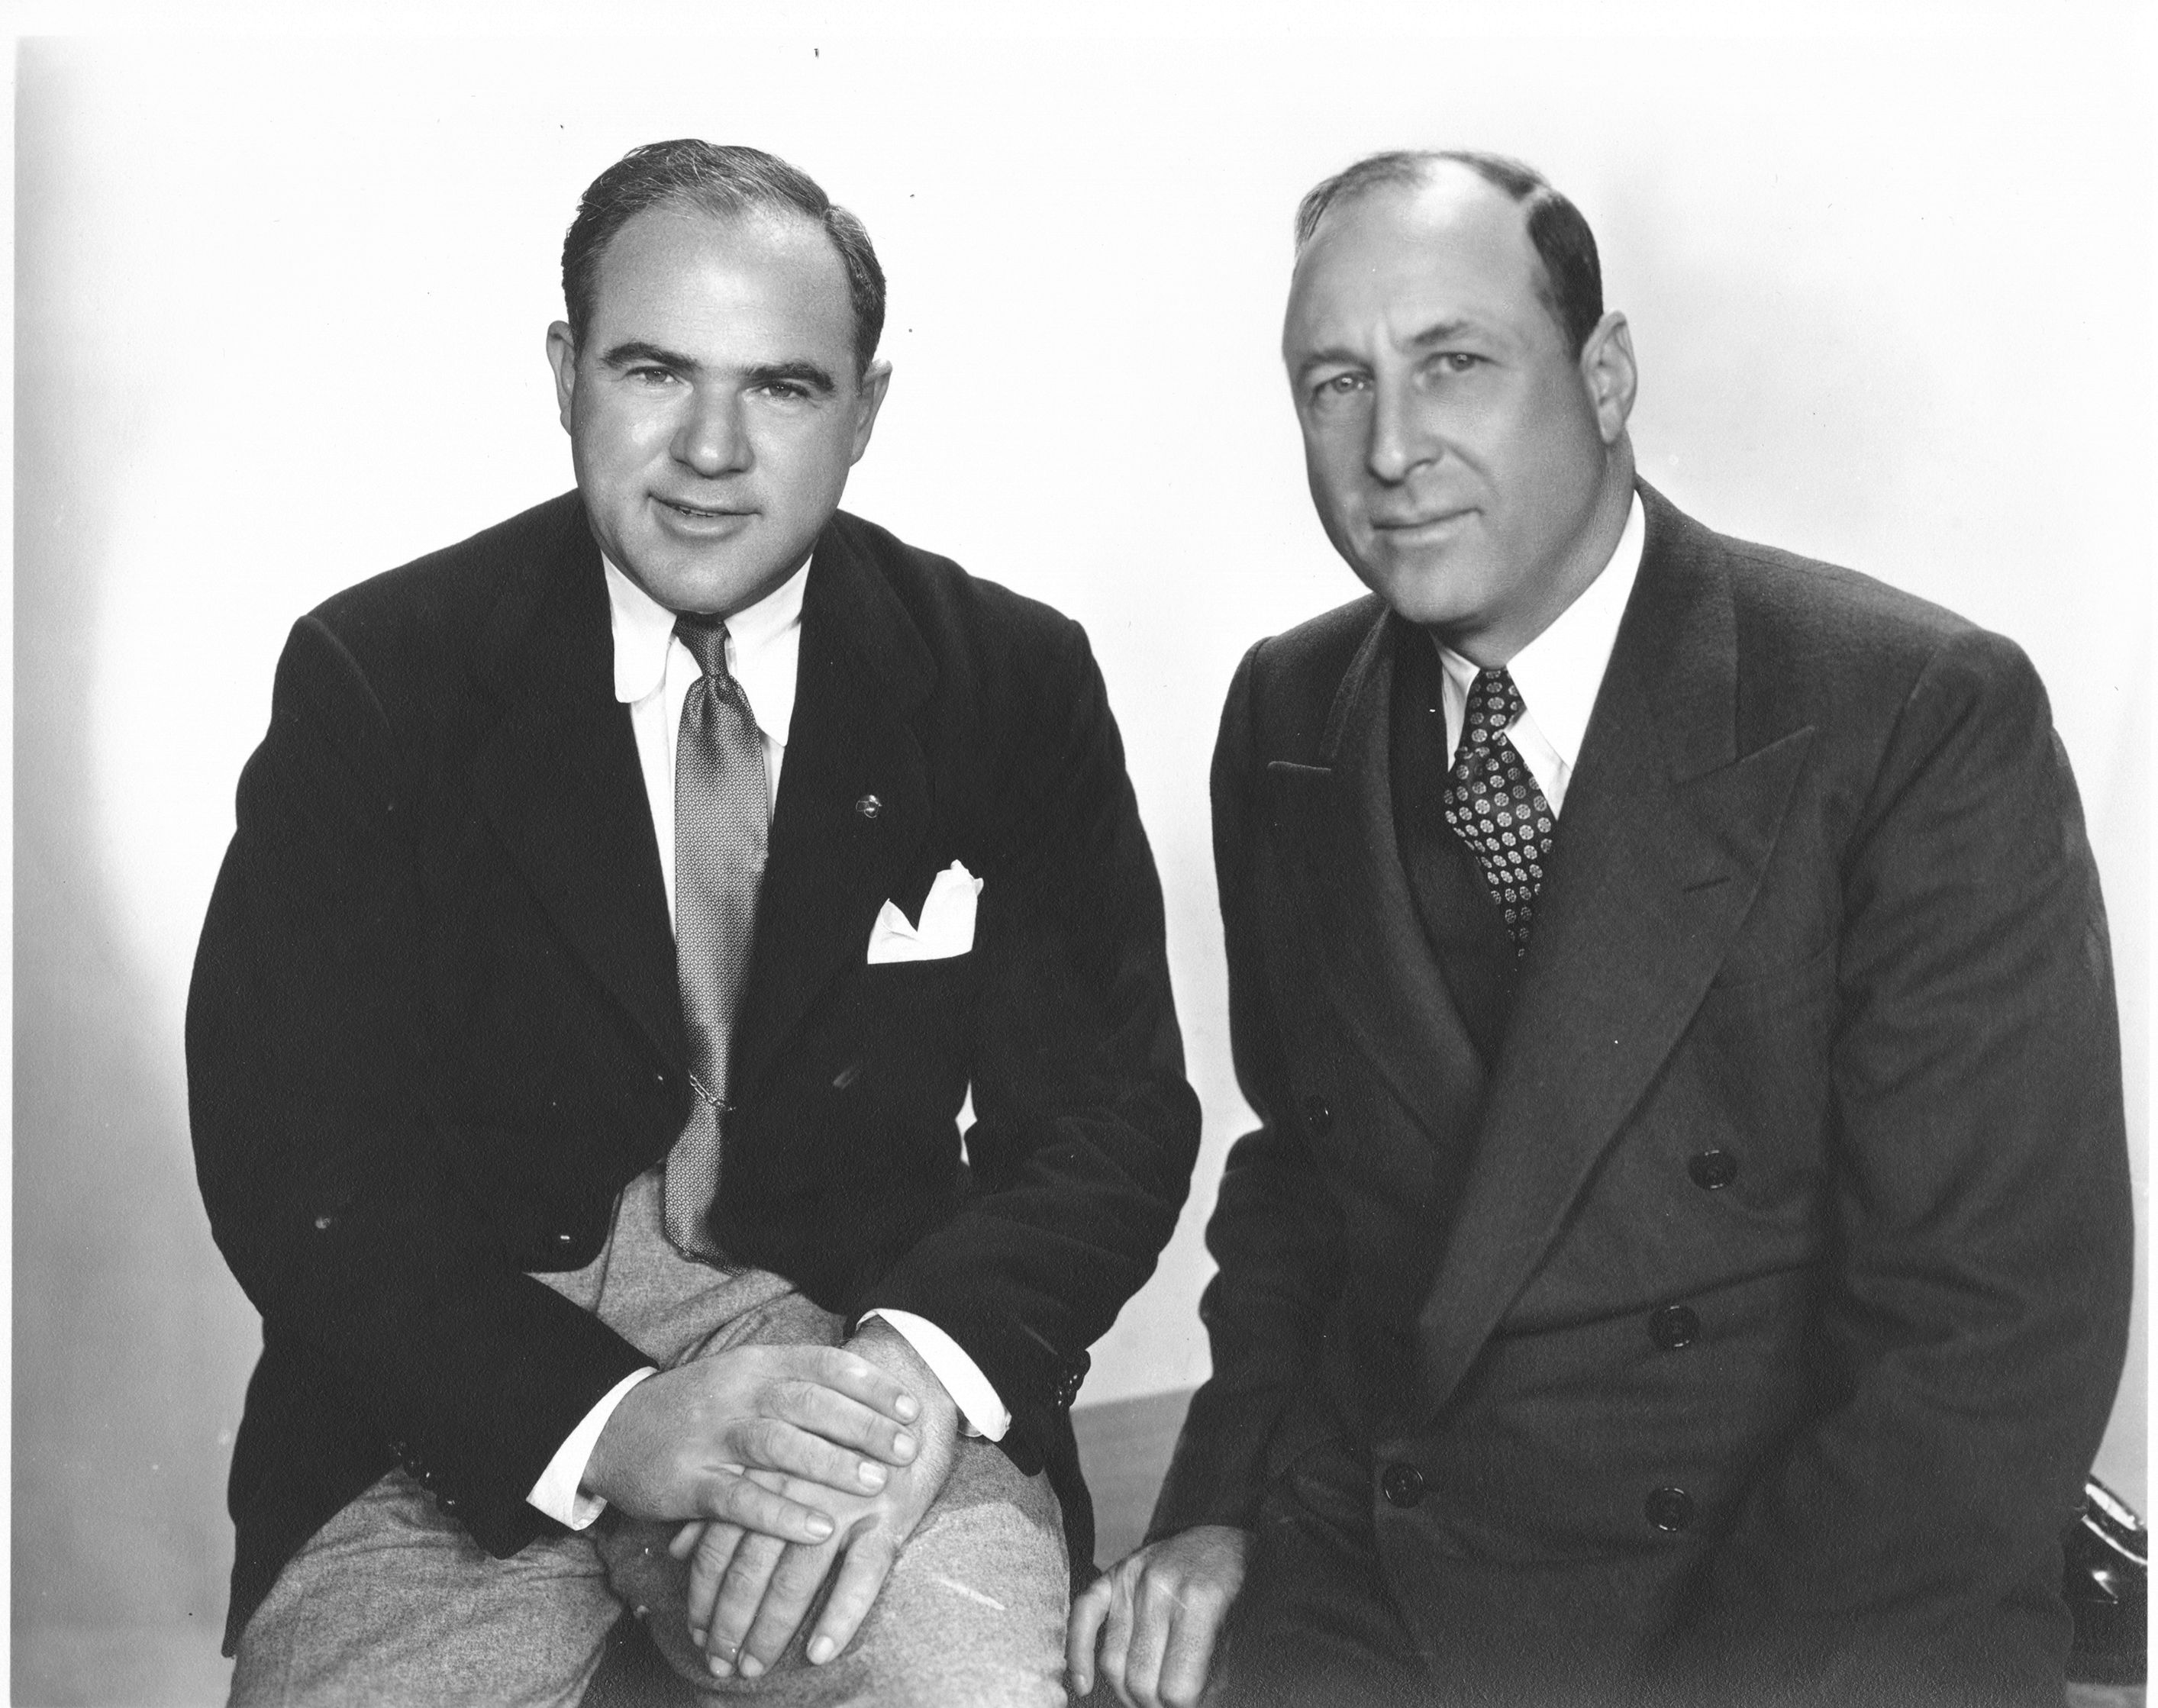 Hal Roach and Dr. Charles H. Strub, co-founders of the Los Angeles Turf Club which formed to build the first racetrack in California, Santa Anita Park (Santa Anita Photo)